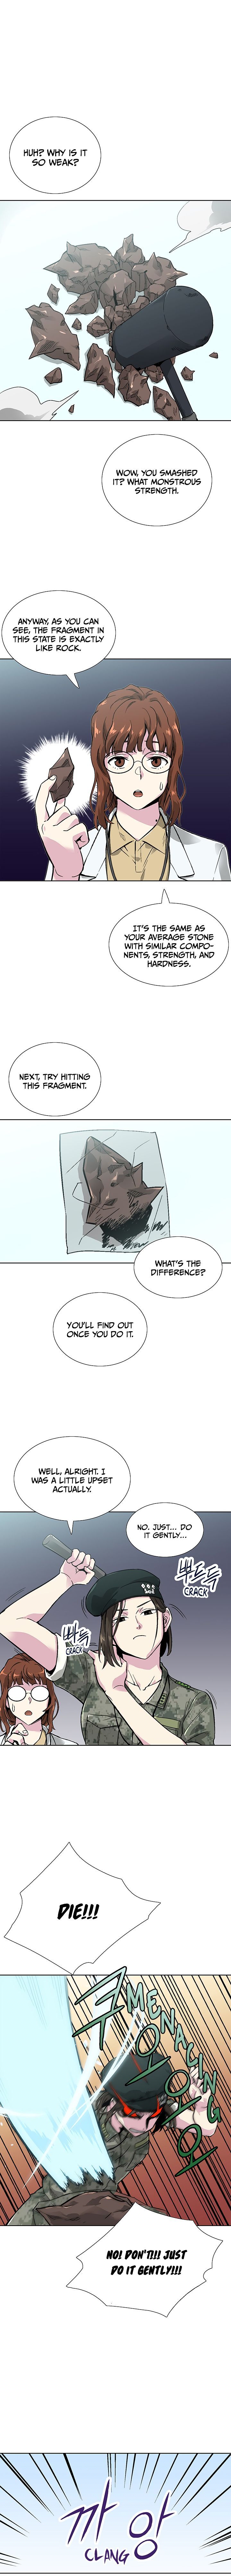 Capture the Golem and Escape Poverty Chapter 6 page 7